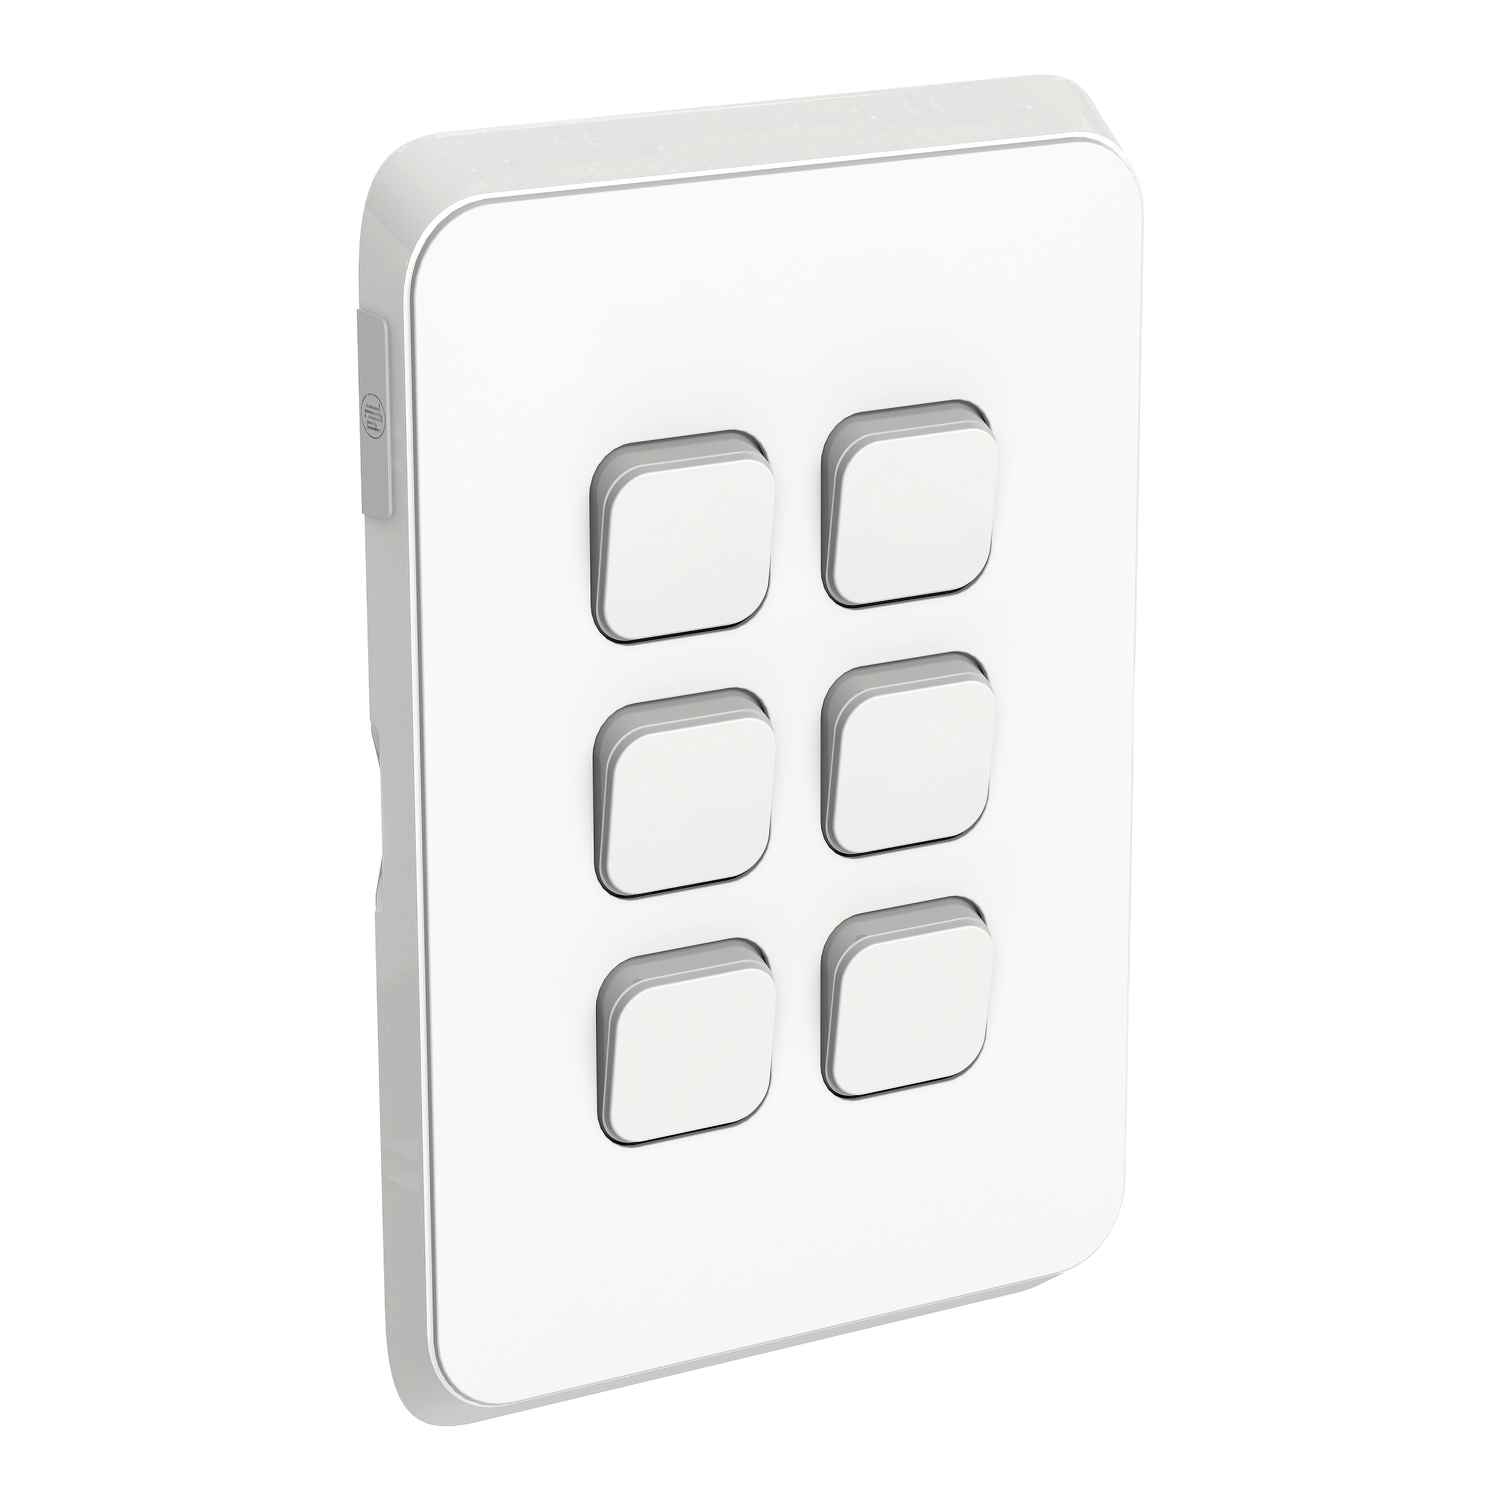 PDL Iconic - Cover Plate Switch 6-Gang - Vivid White